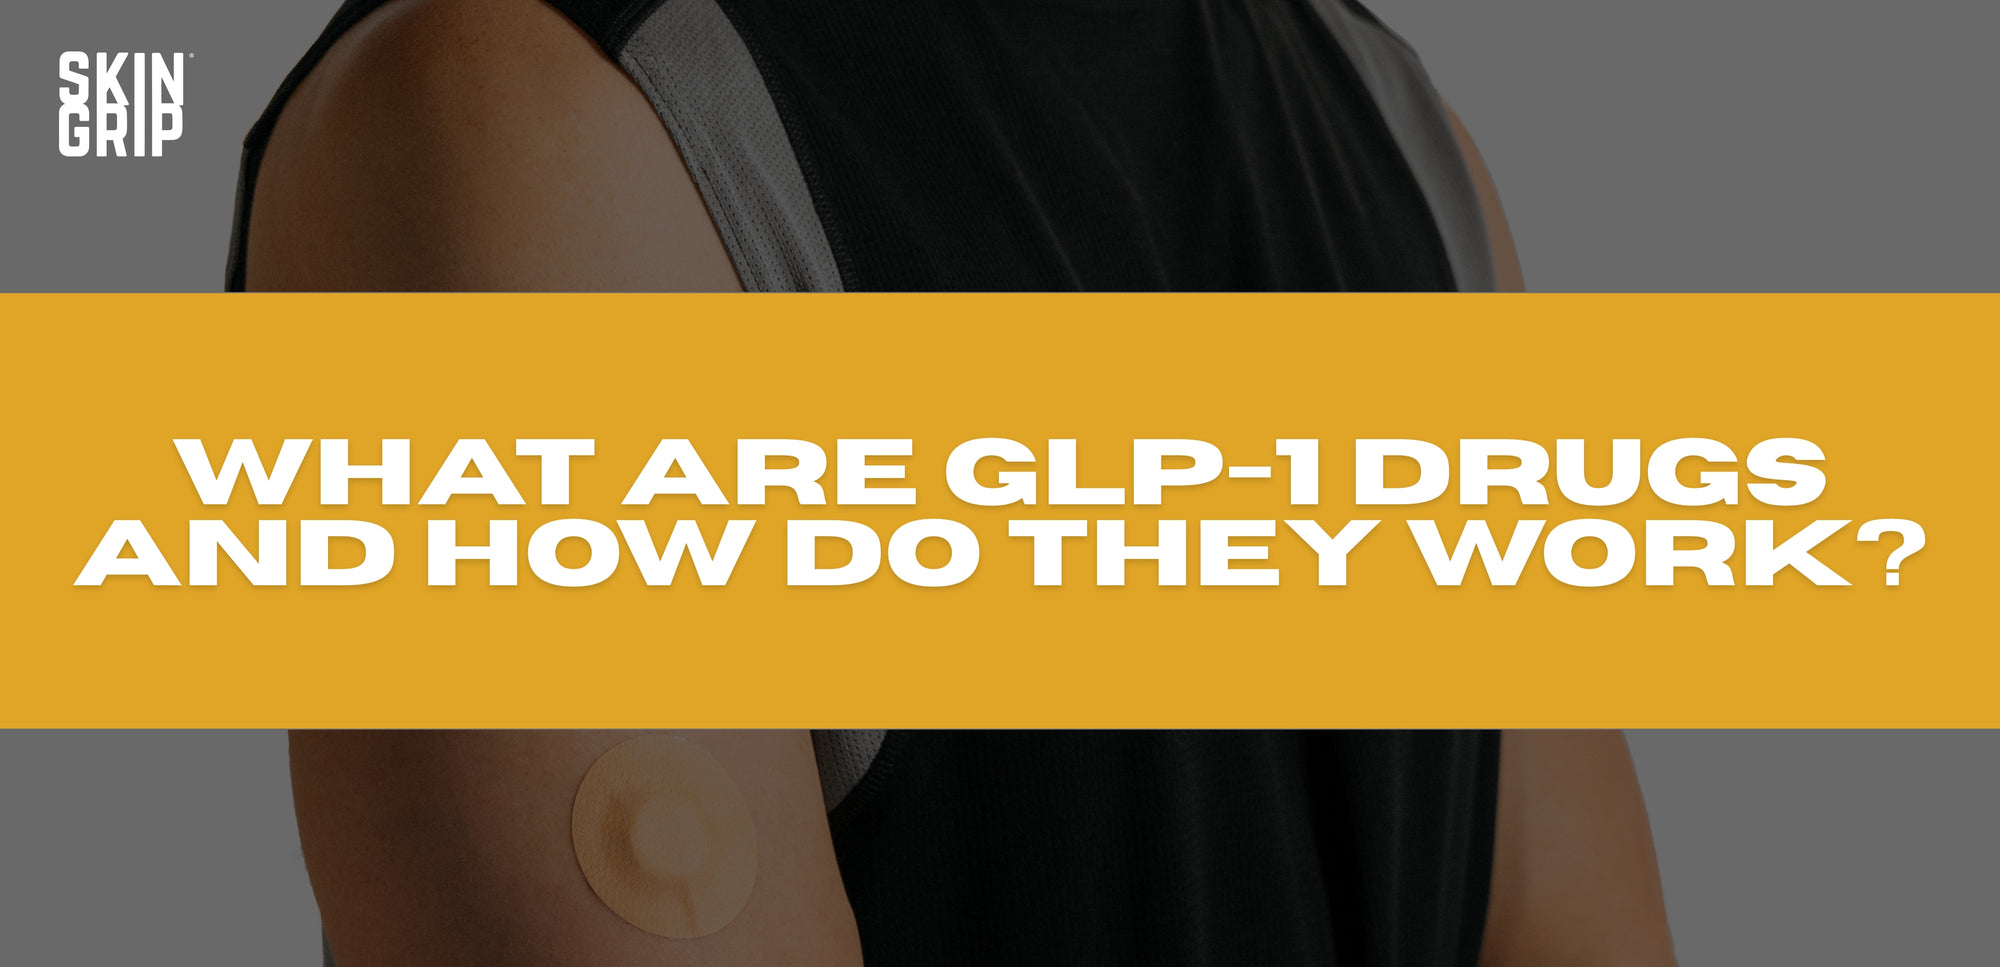 Ozempic, Victoza, Trulicity and More: what are GLP-1 drugs and how do they work?